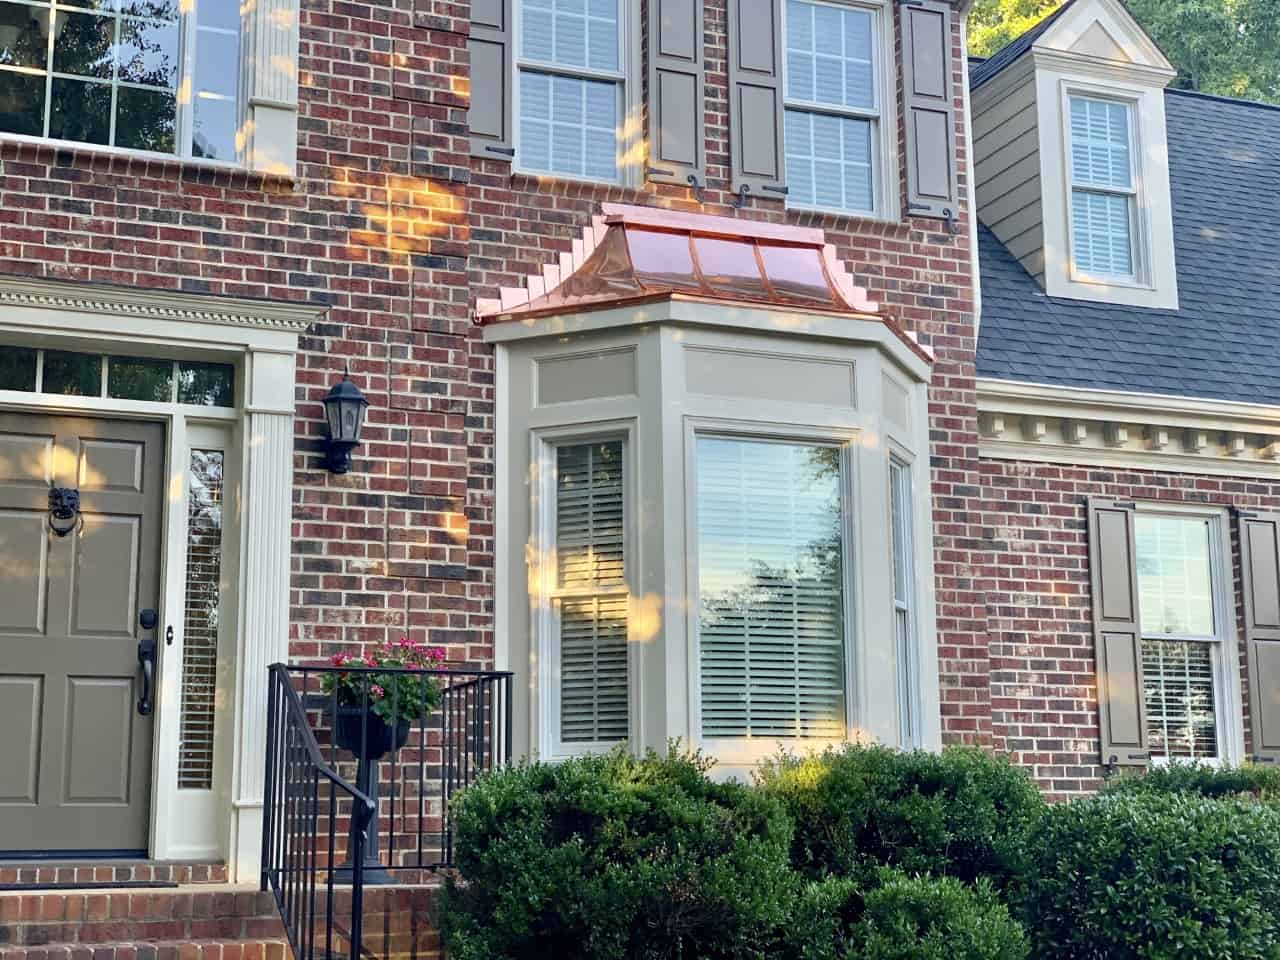 Copper bay window Raleigh NC